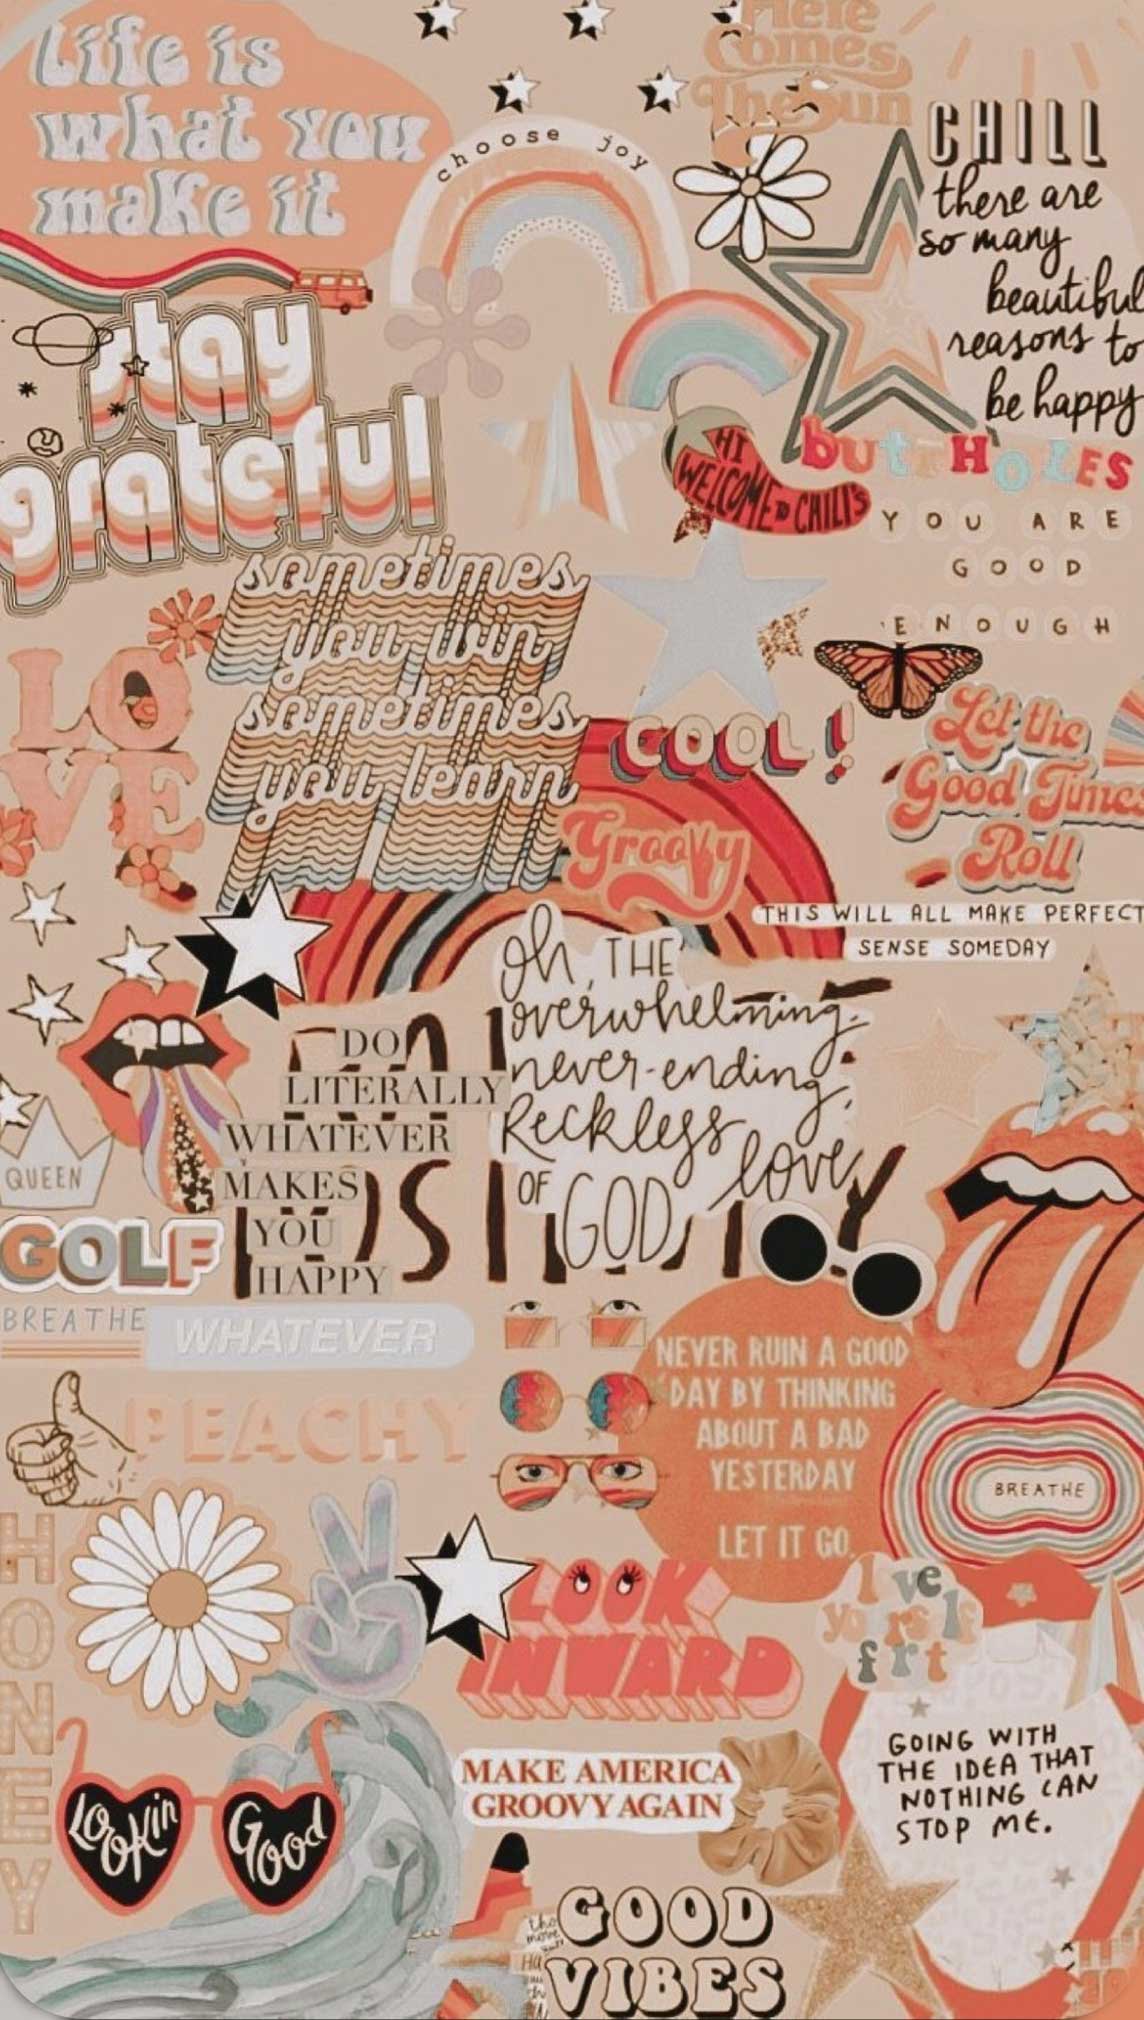 Collage of retro images and text in a peachy pink color scheme - Happy, collage, peach